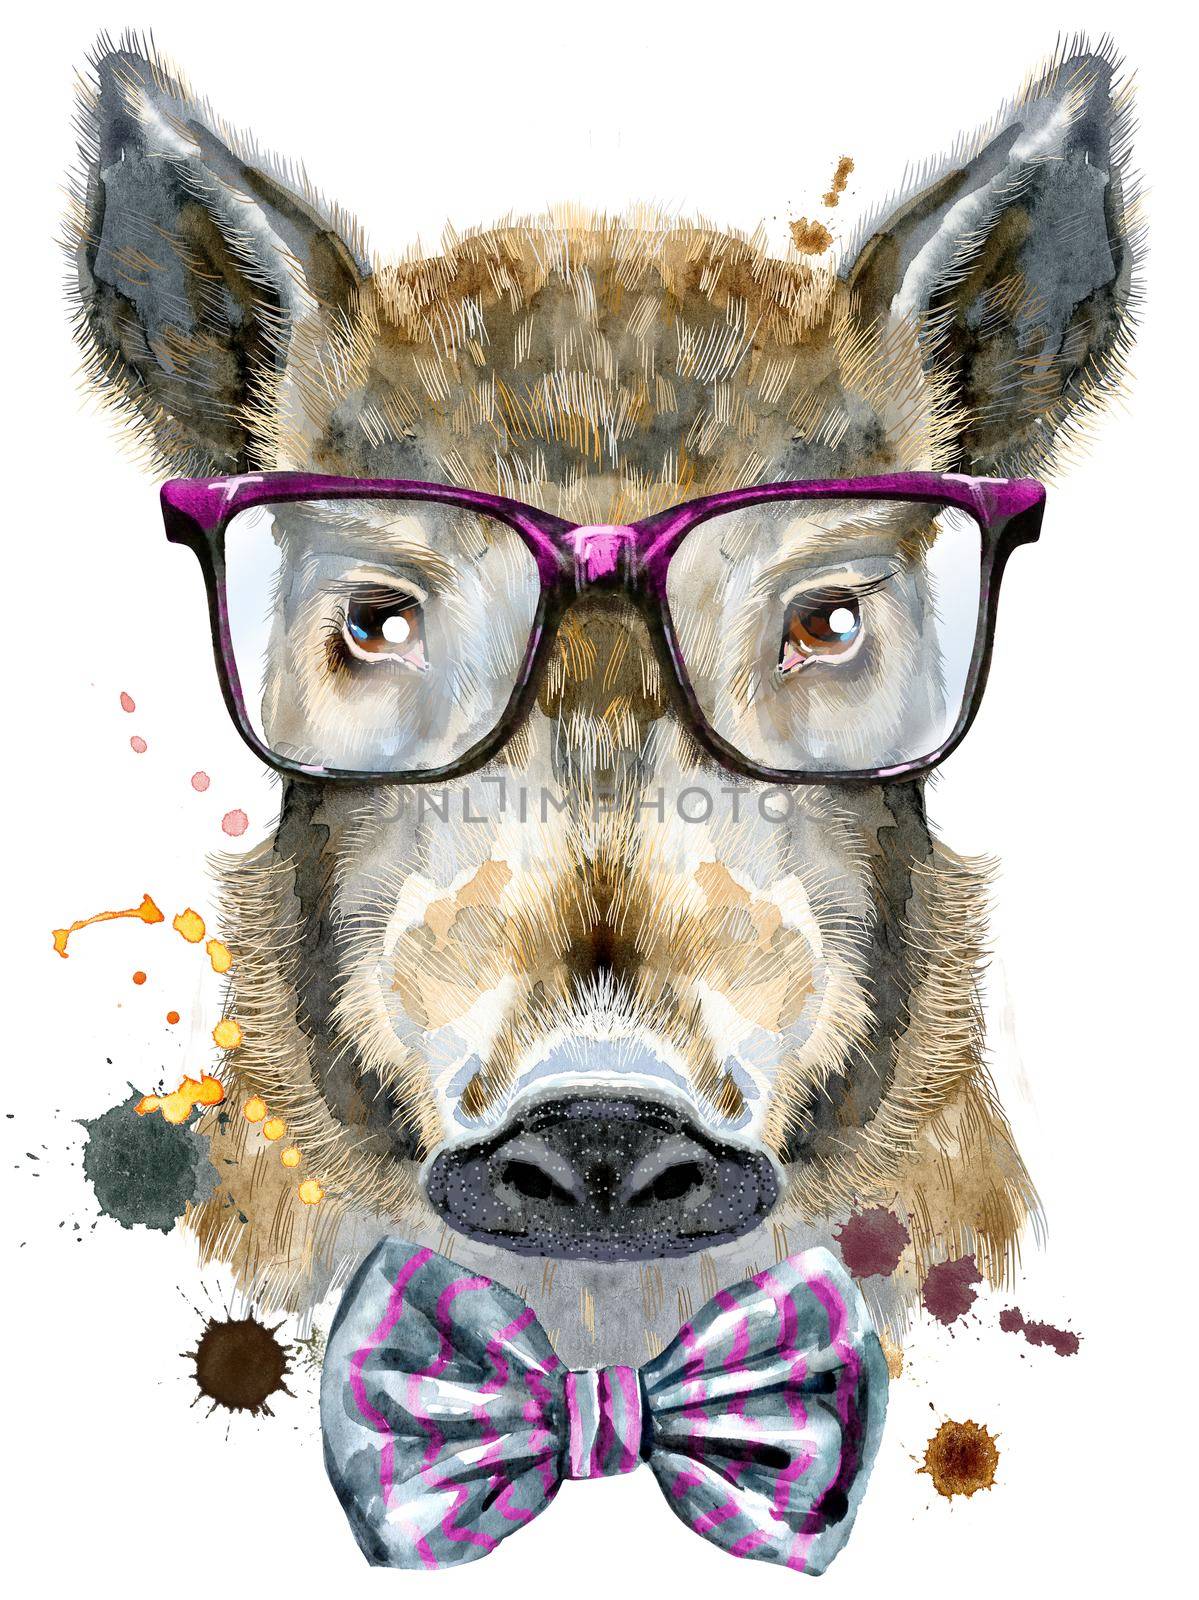 Watercolor portrait of wild boar with glasses and a bow tie by NataOmsk